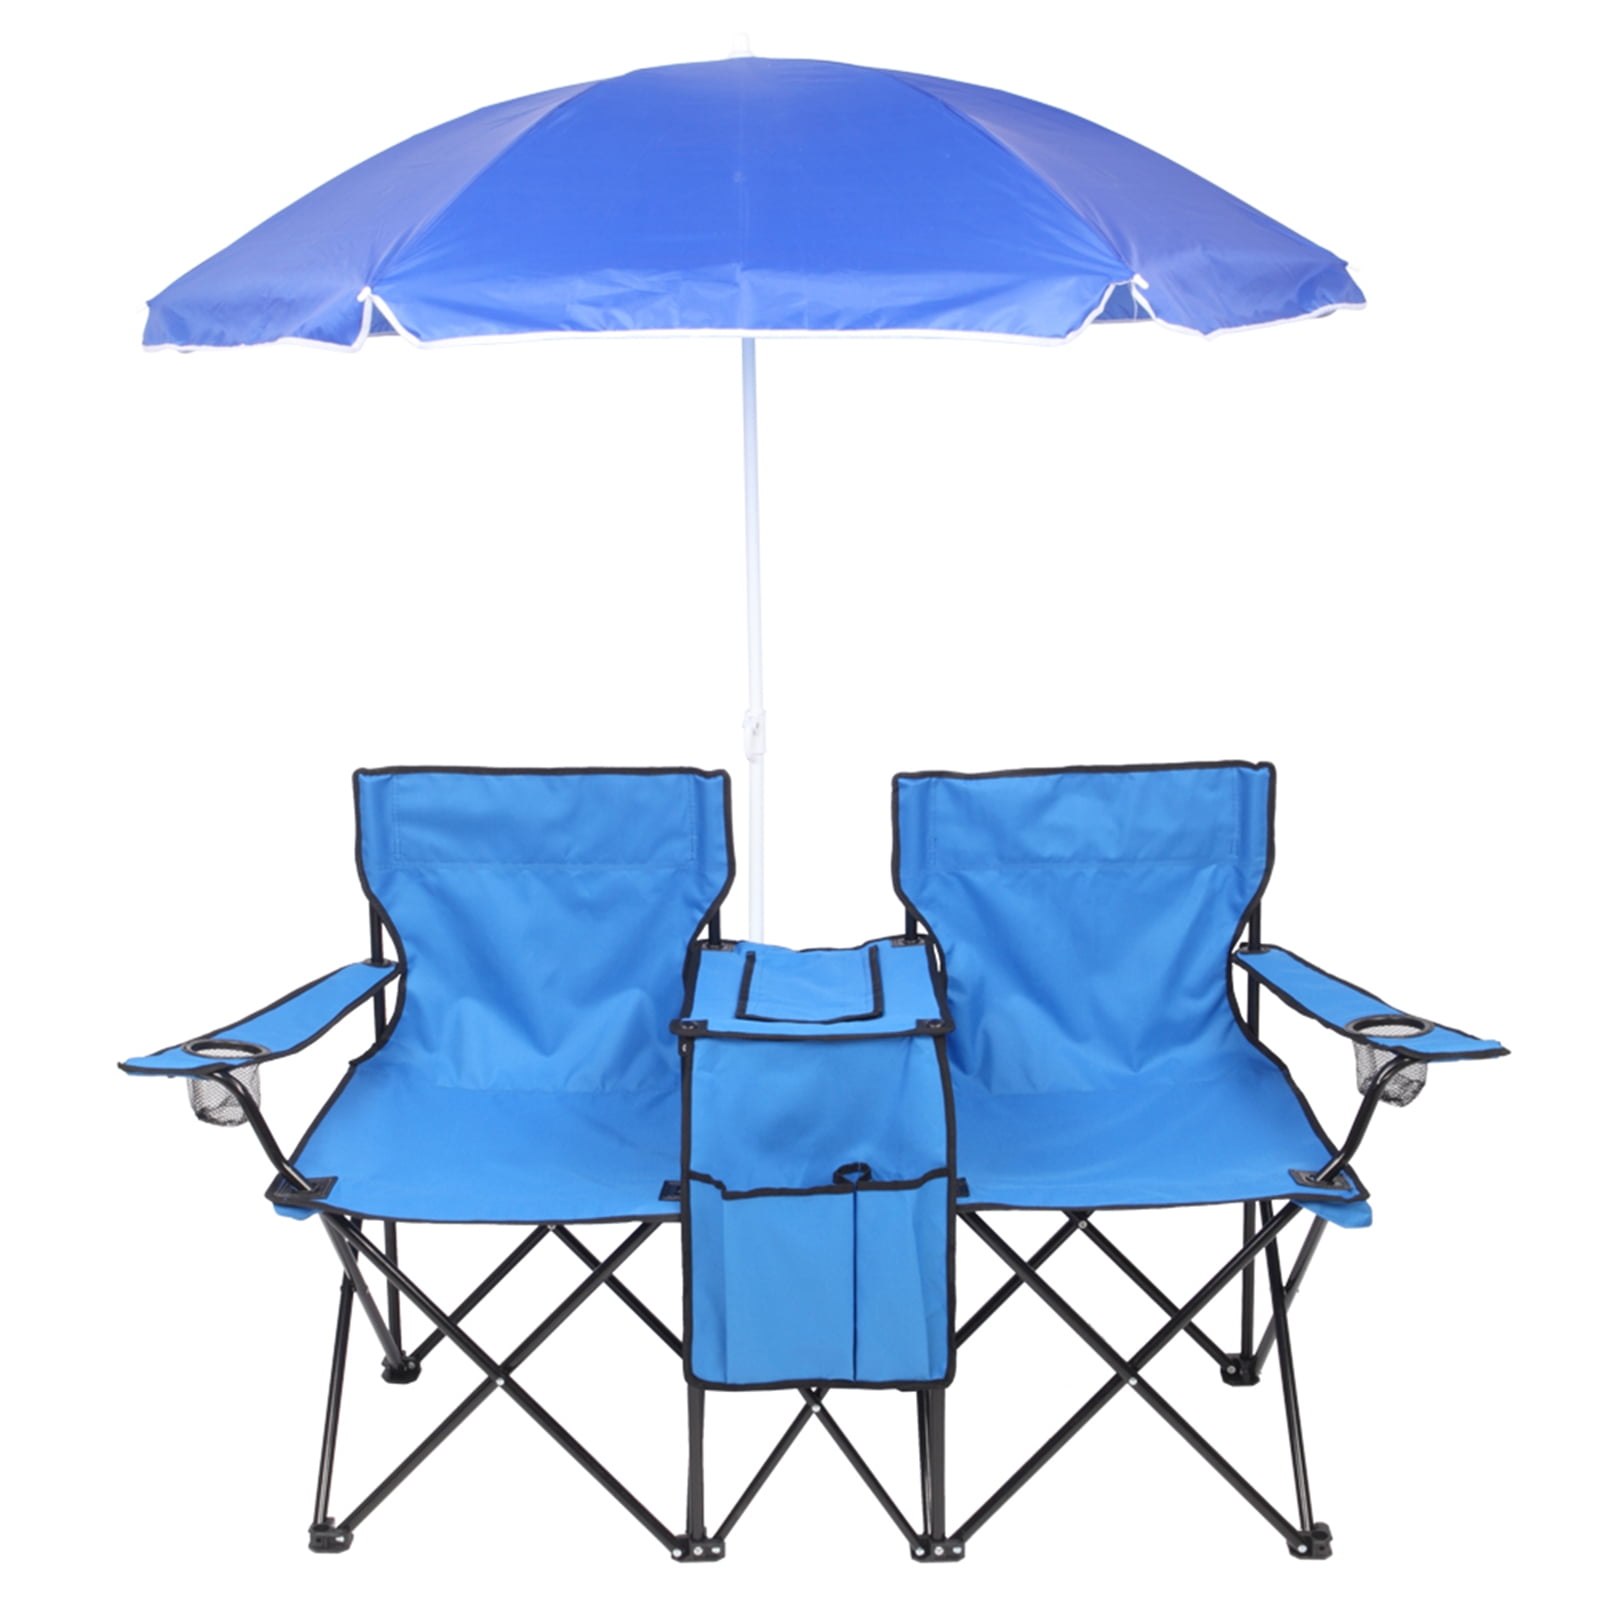 Portable Folding Beach Canopy Chair W/ Cup Holders Bag Camping Hiking Play 